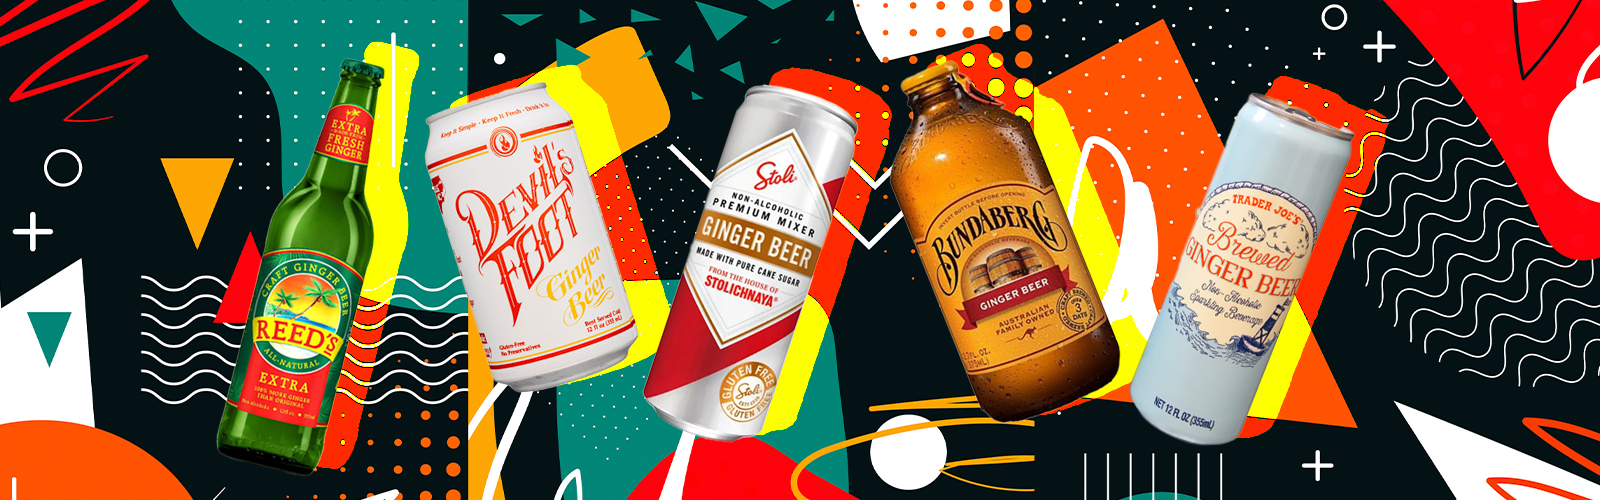 How to Find the Best Ginger Beer for Your Cocktail